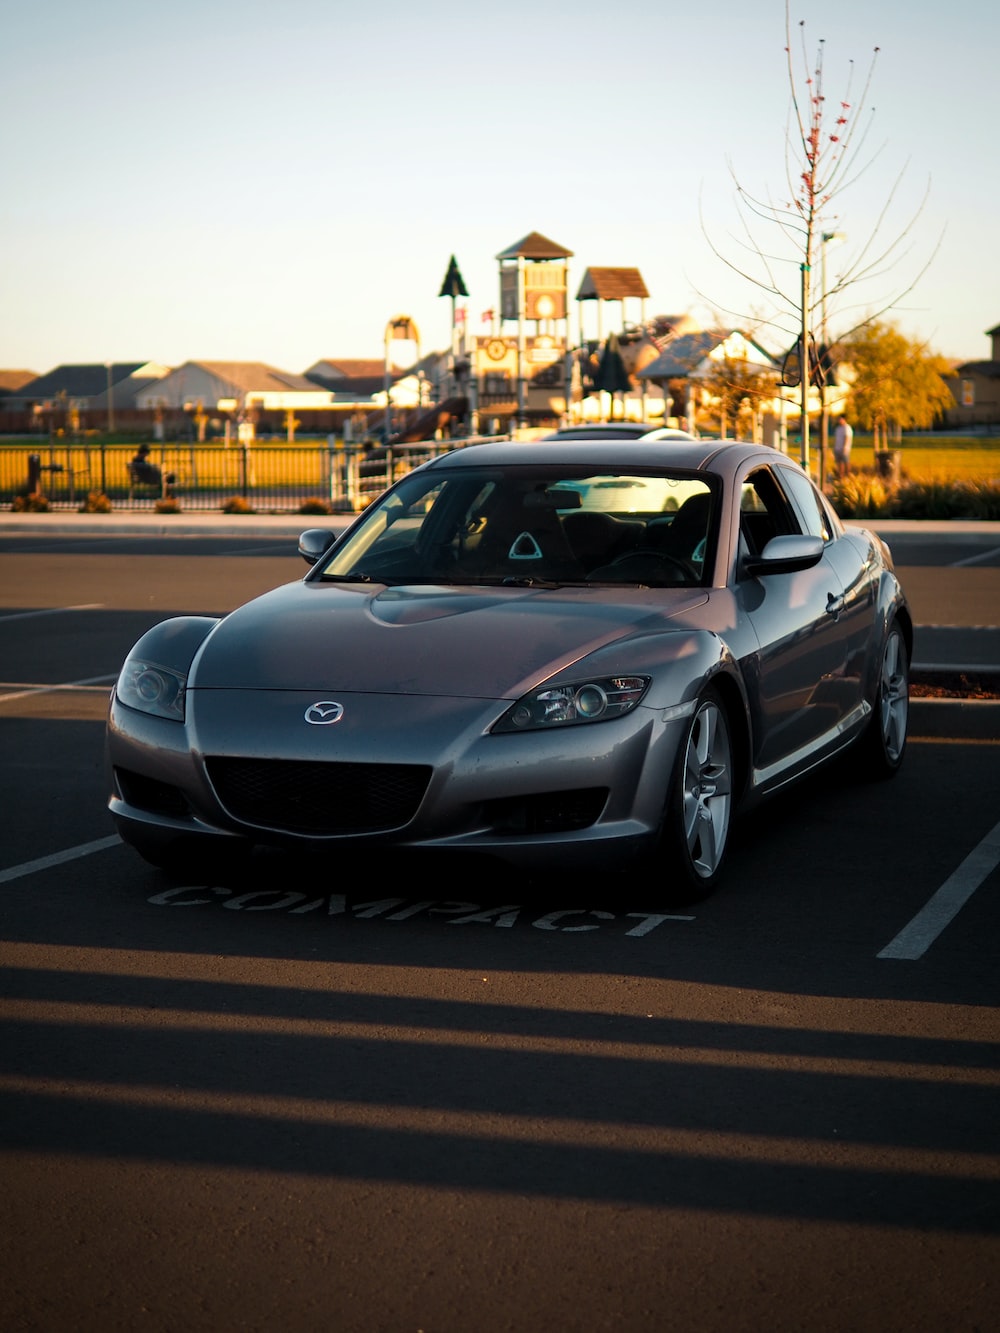 Mazda Rx-8 Wallpapers